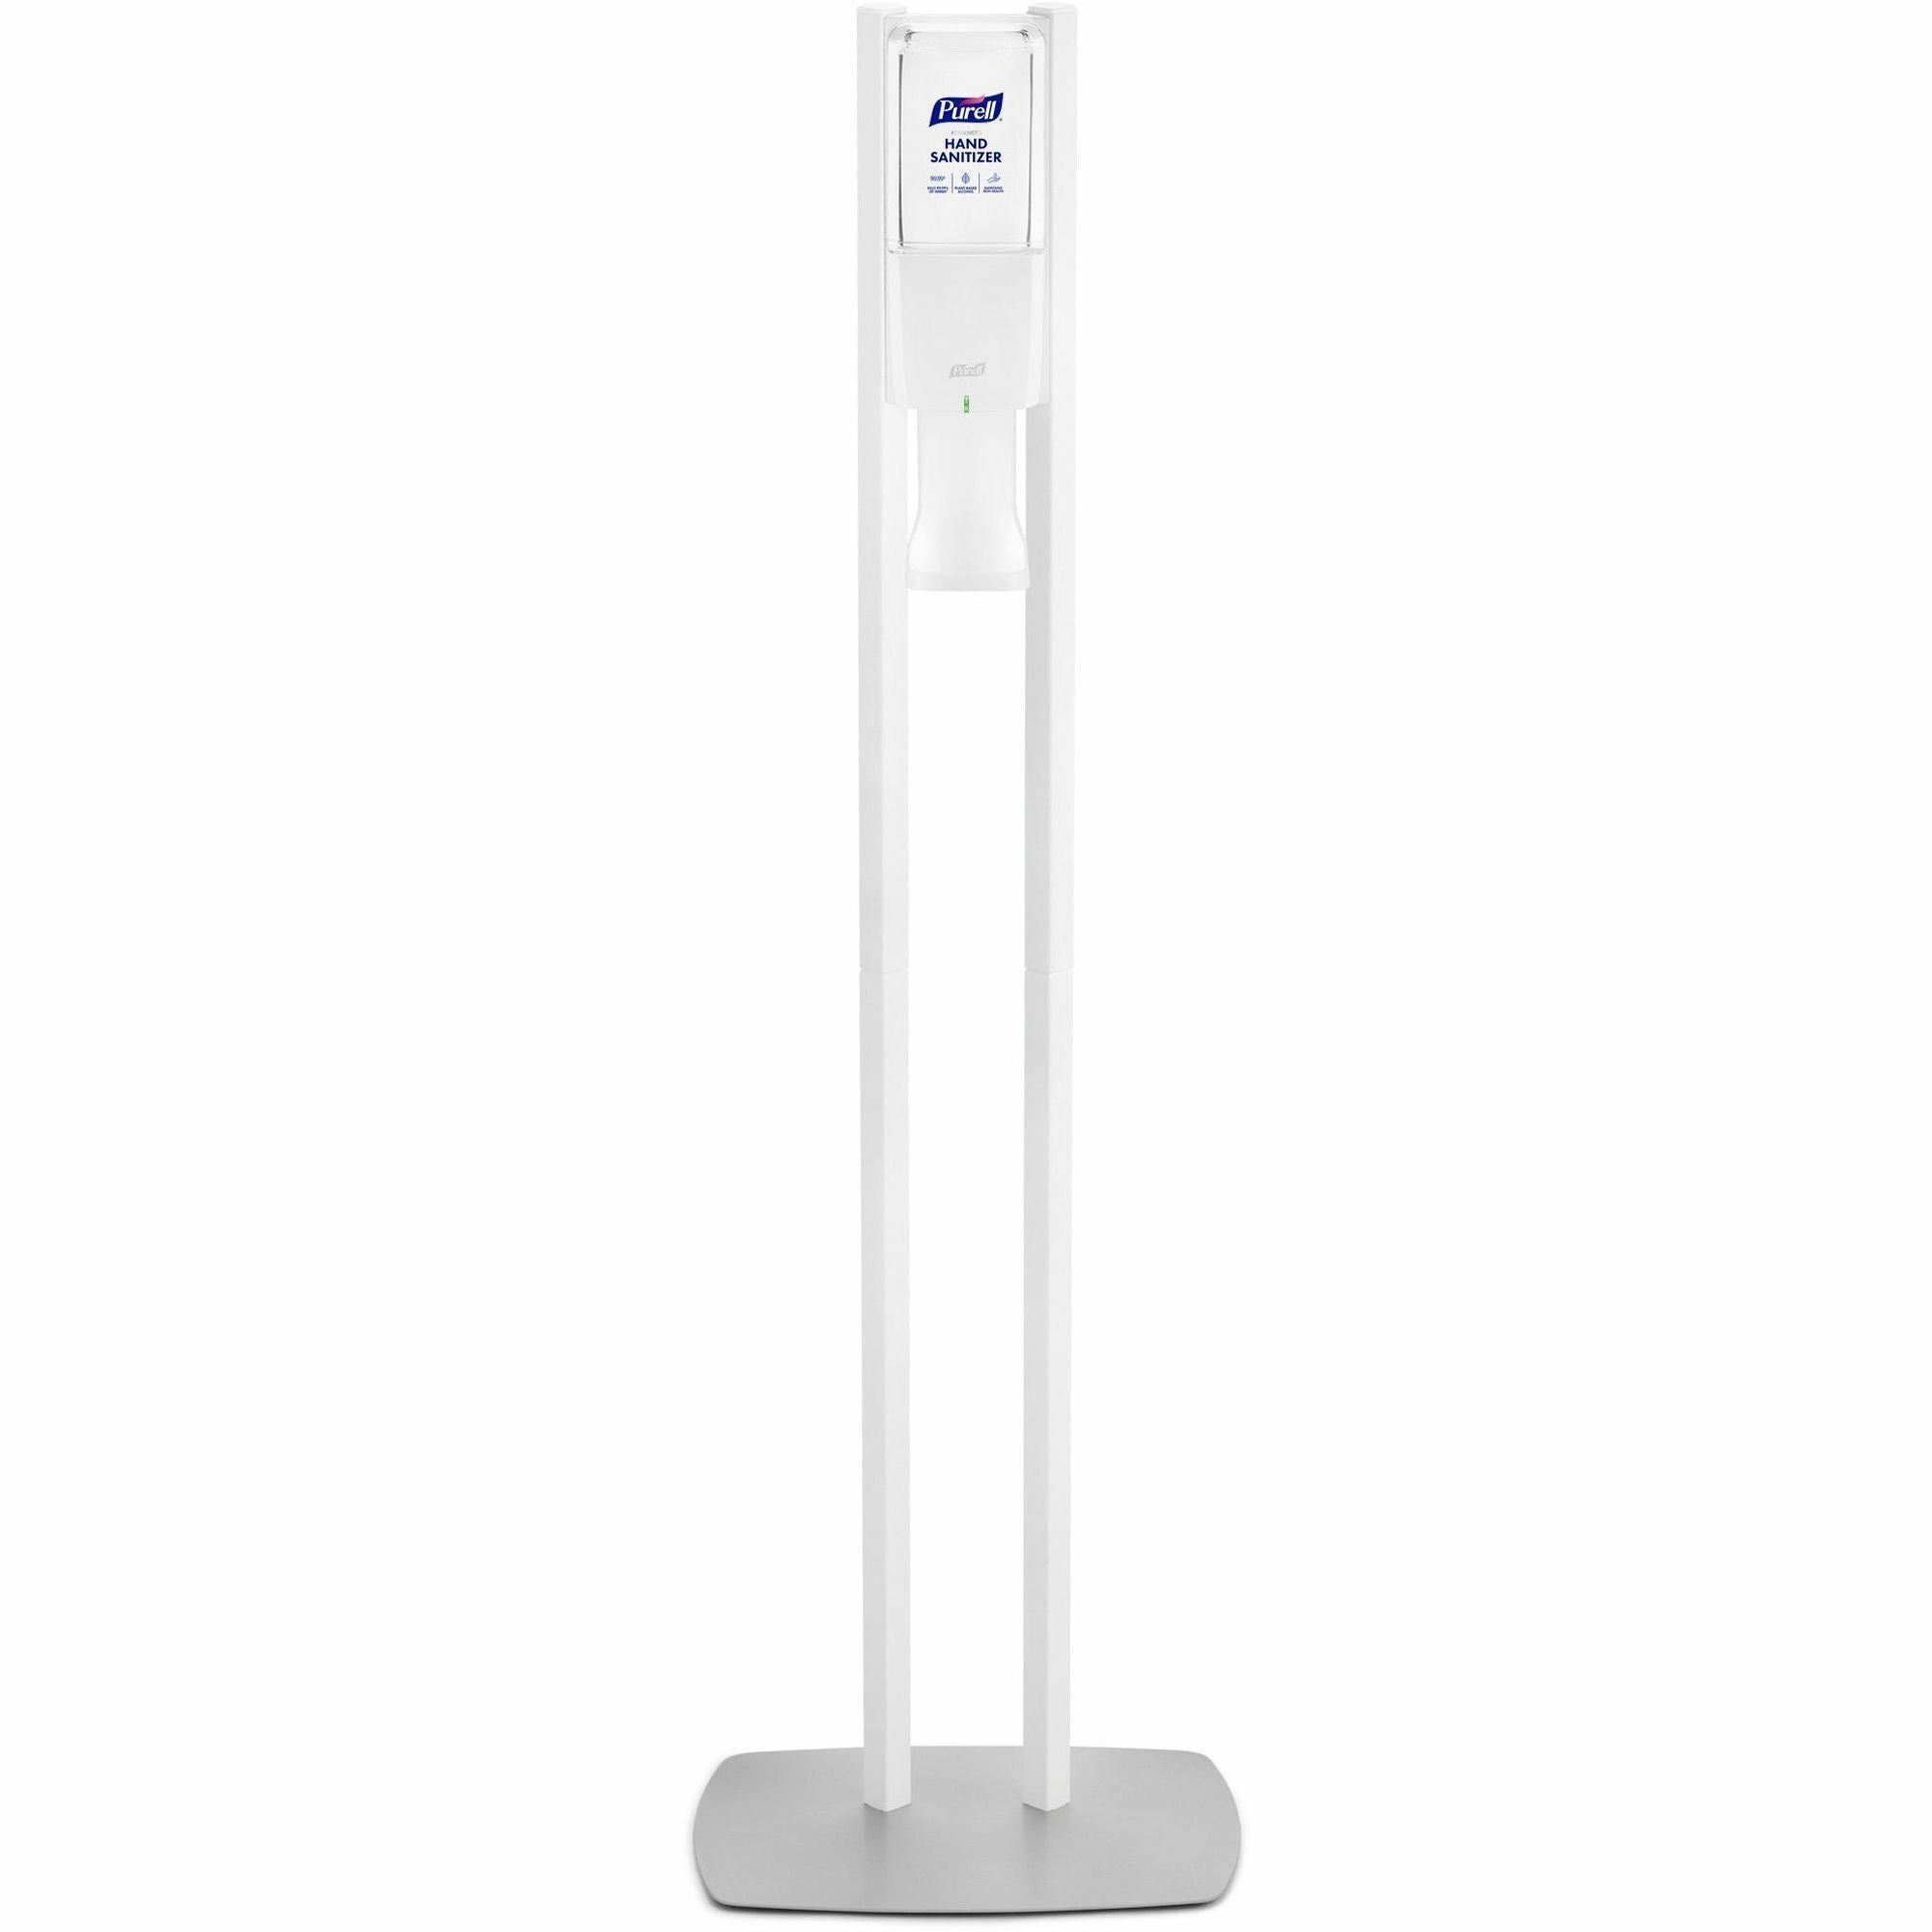 purell-es10-floor-stand-with-automatic-dispenser-floor-freestanding-white-for-sanitizing-dispenser-high-traffic-area-waiting-room-hallway-sturdy-low-profile-base-lightweight_goj8210ds - 1